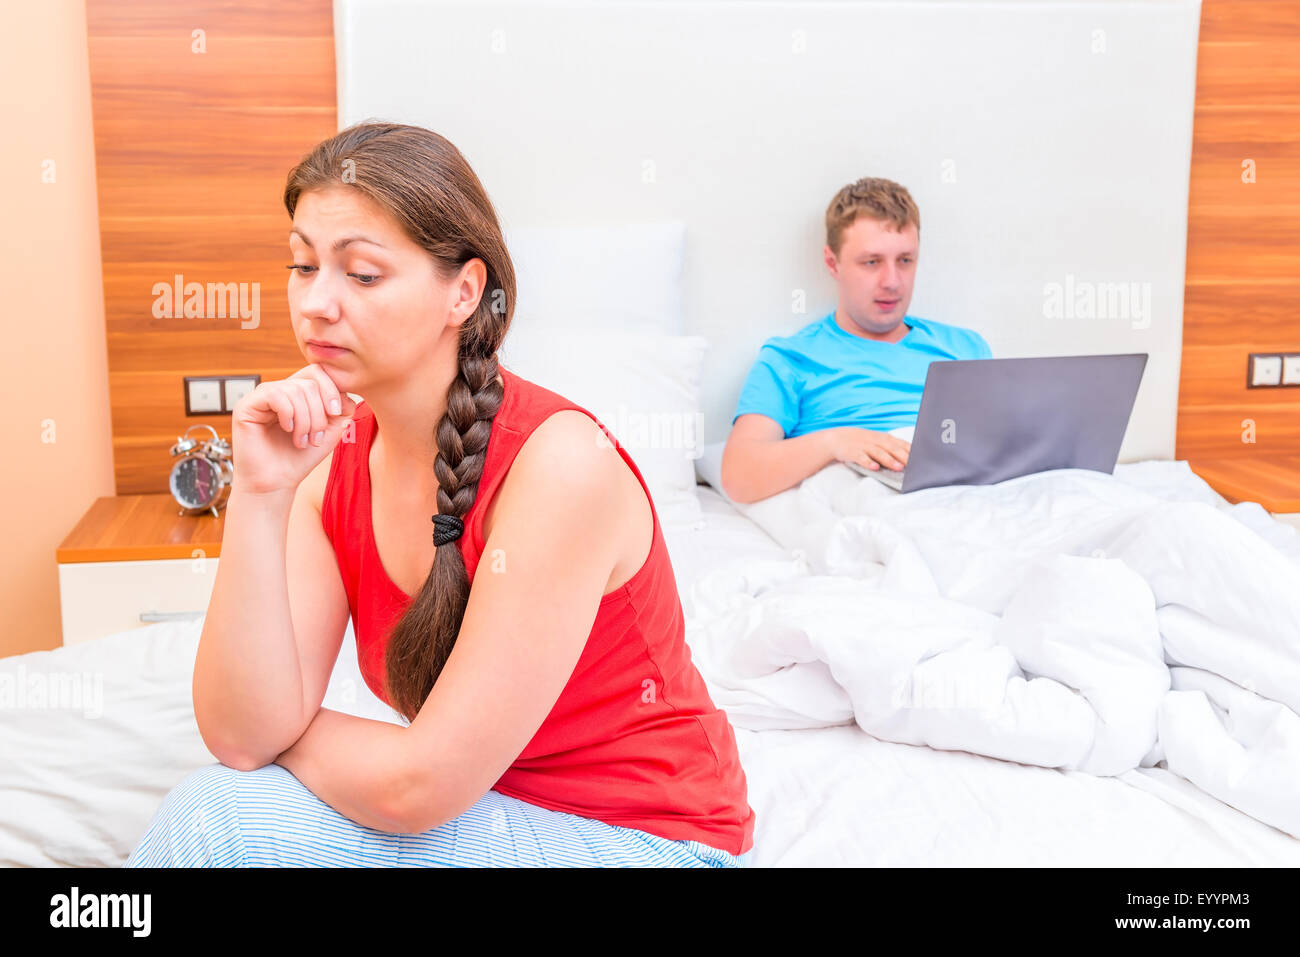 the difficulties of mutual understanding a married couple Stock Photo